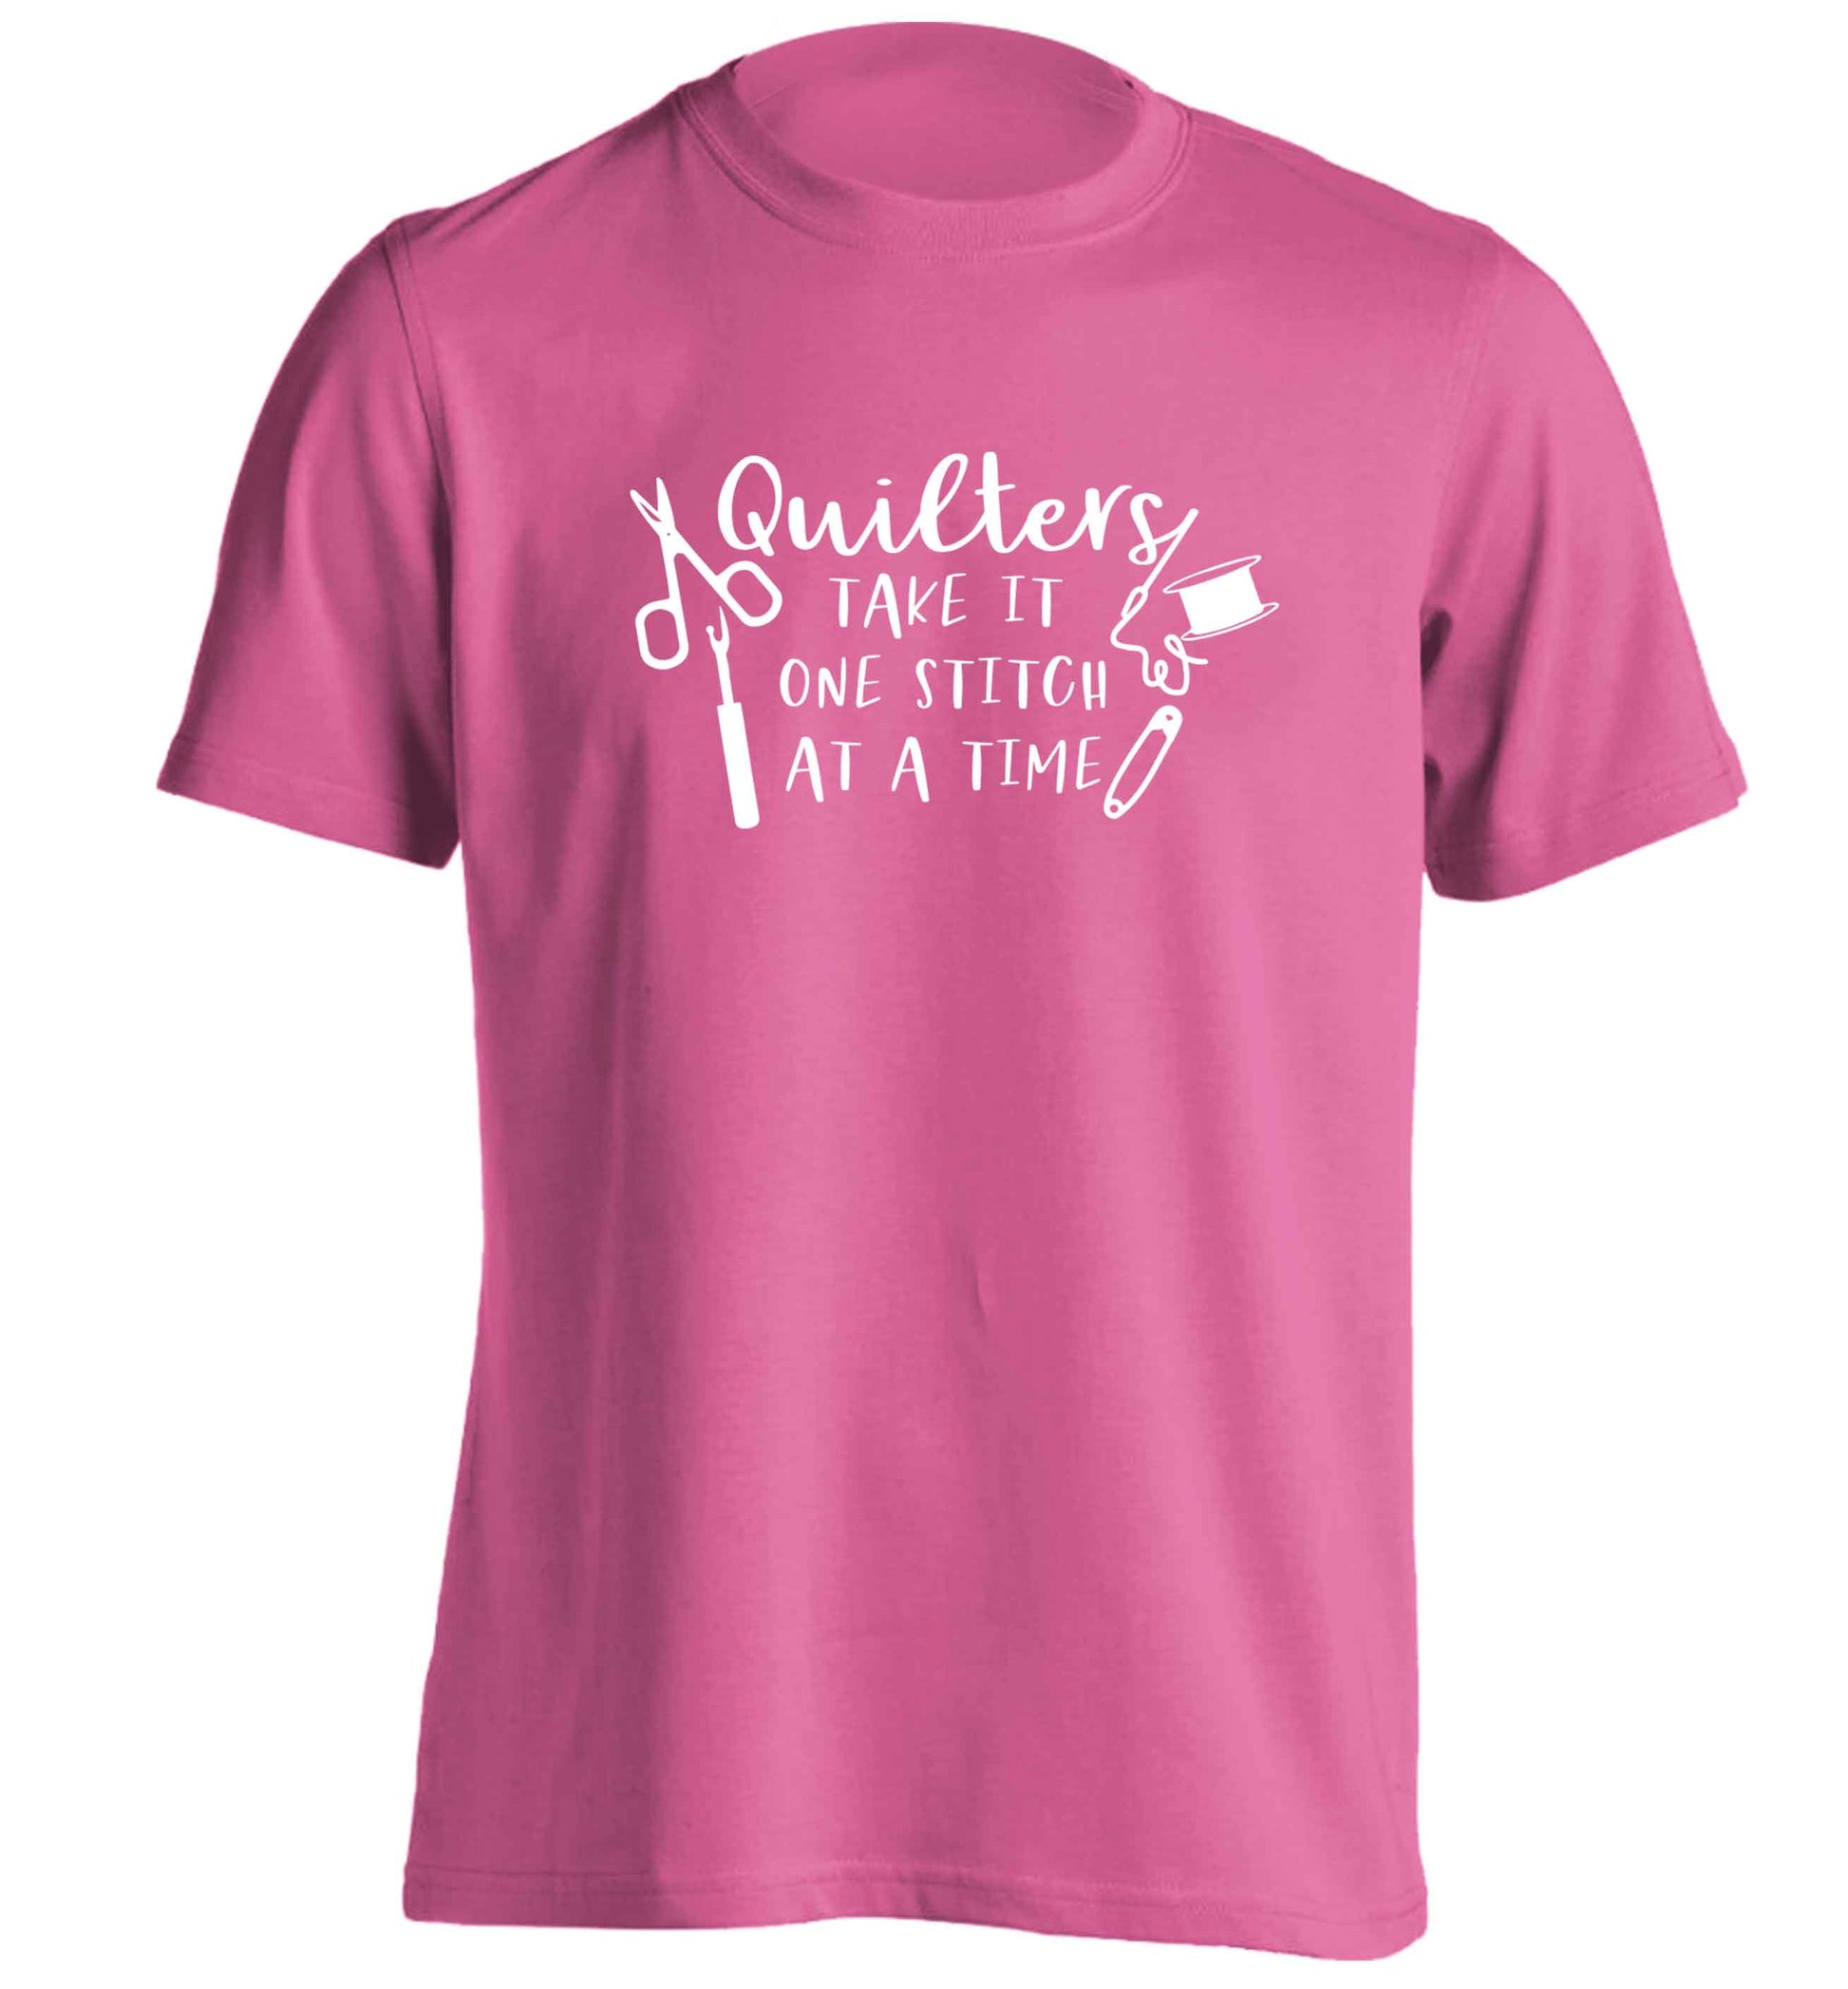 Quilters take it one stitch at a time  adults unisex pink Tshirt 2XL